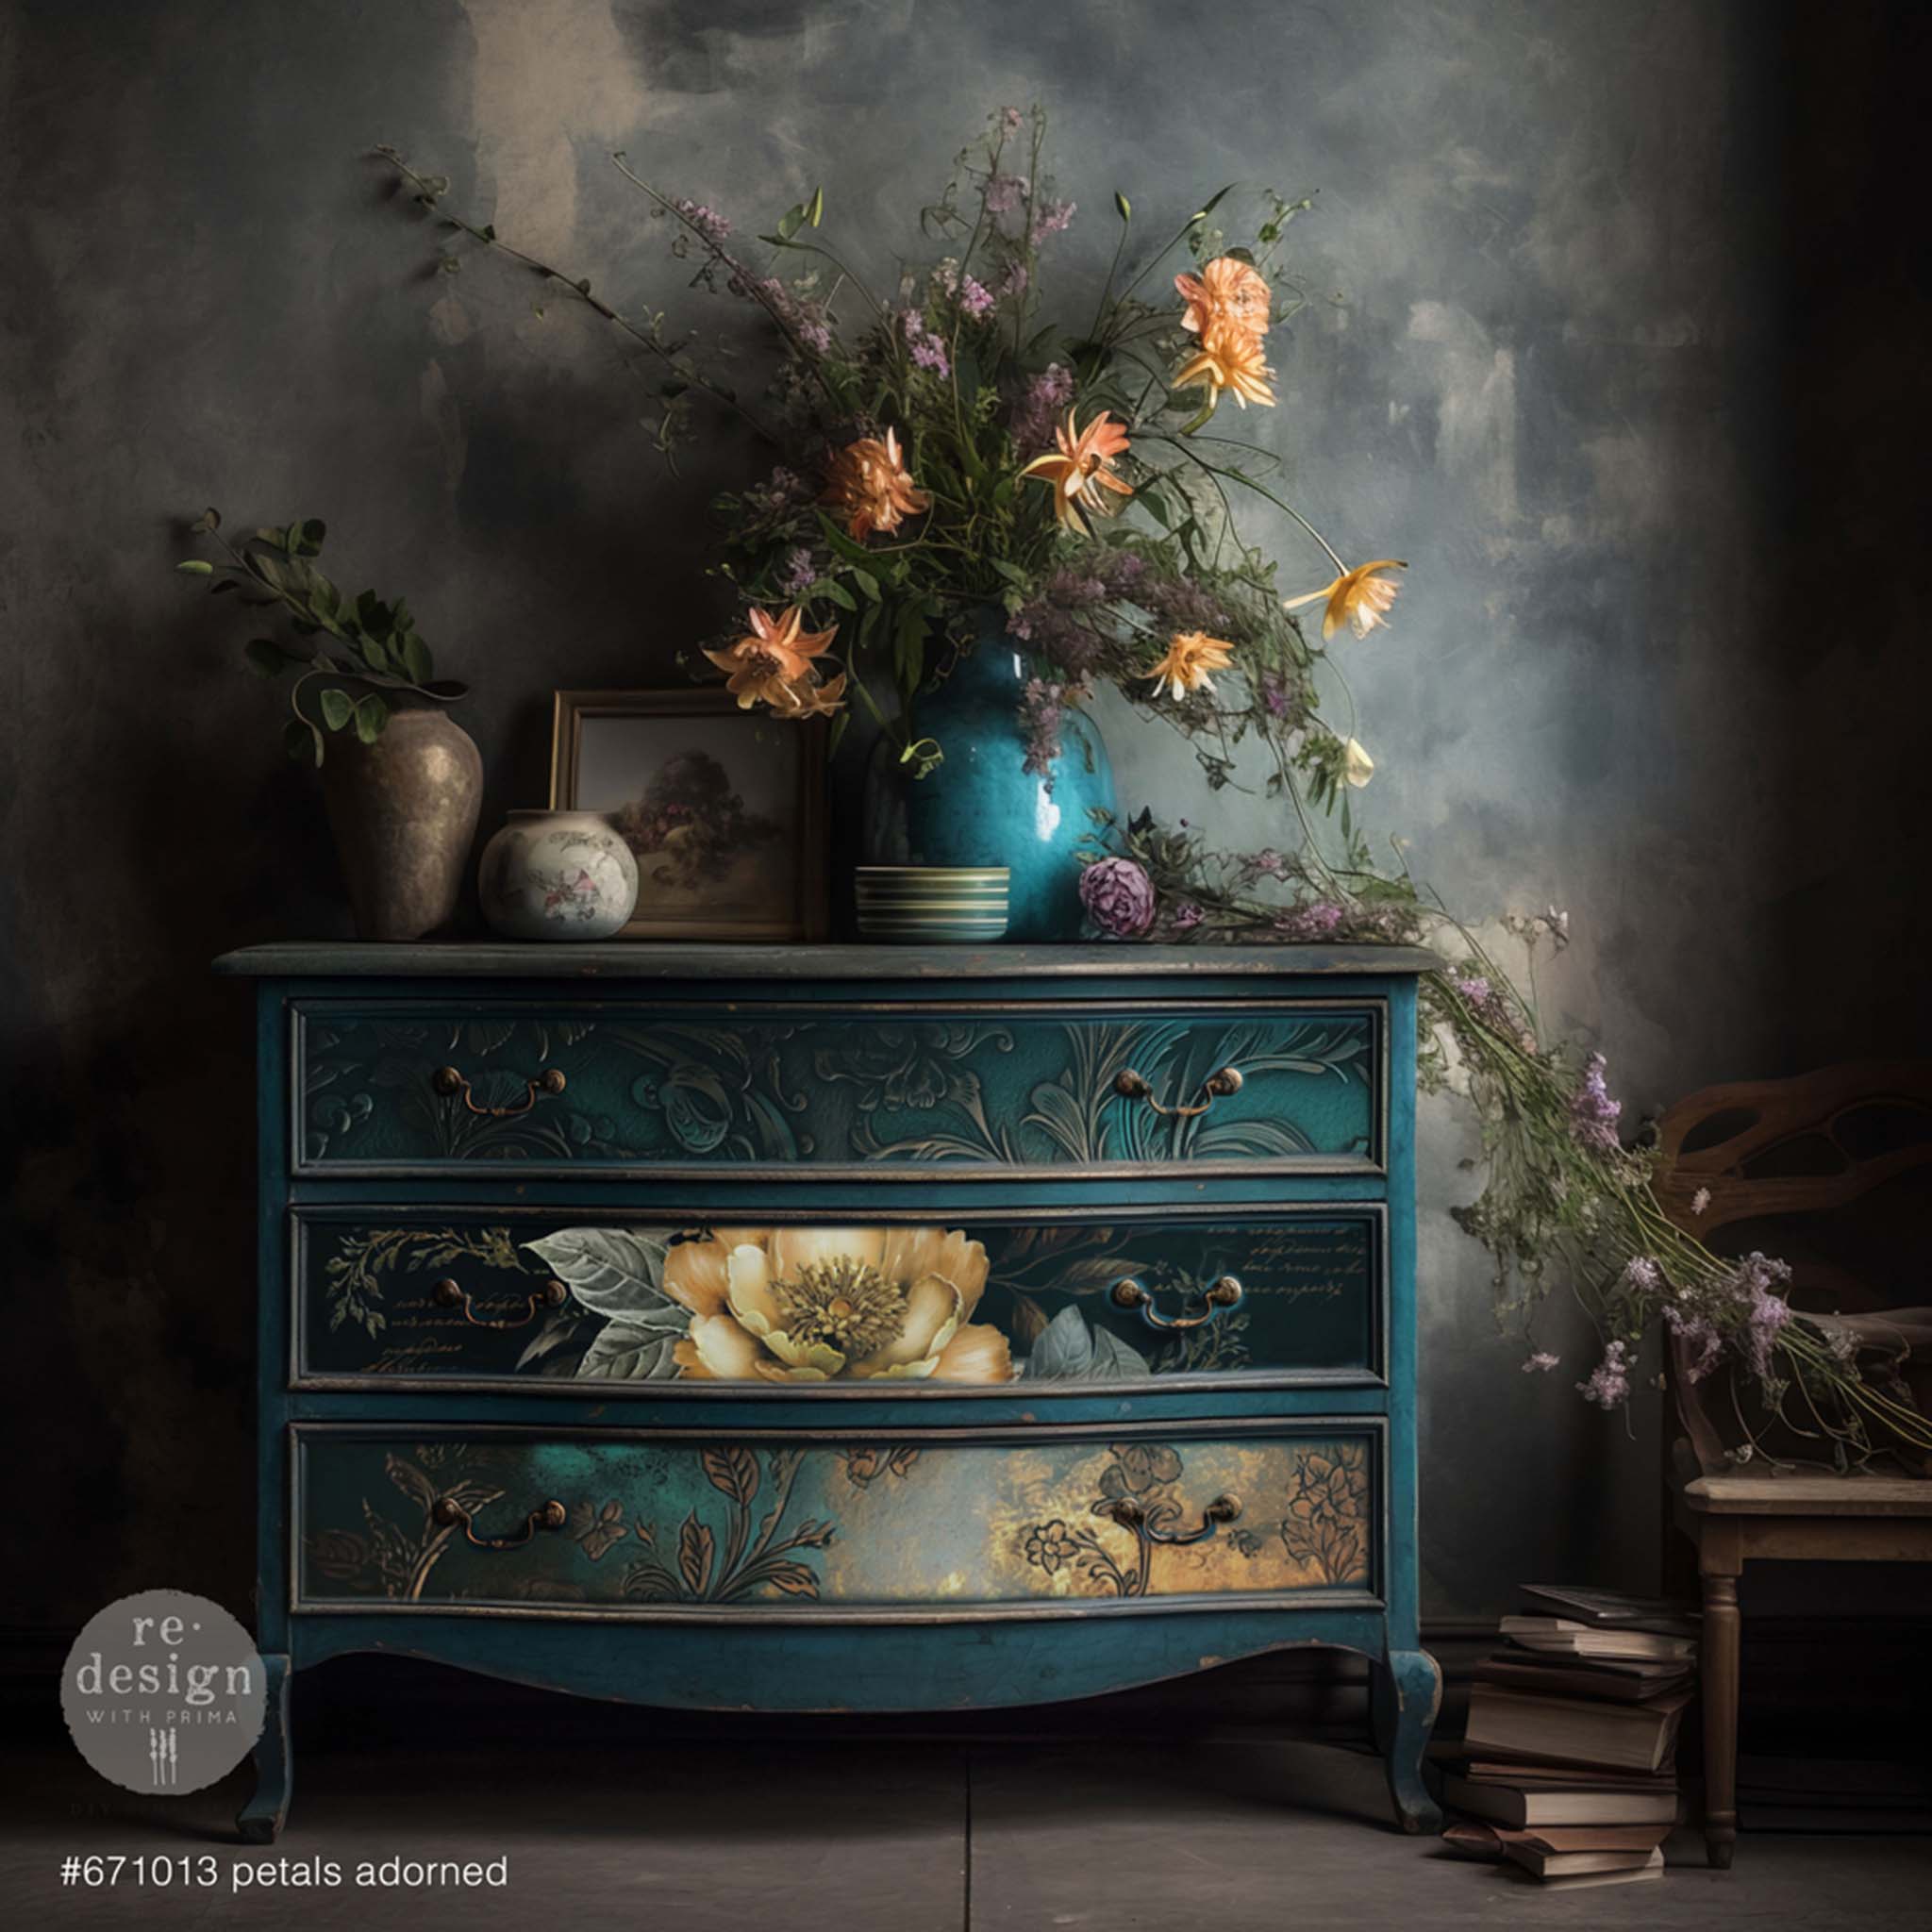 A vintage 3-drawer dresser is painted dark teal and features ReDesign with Prima's Petals Adorned tissue paper on the drawers.